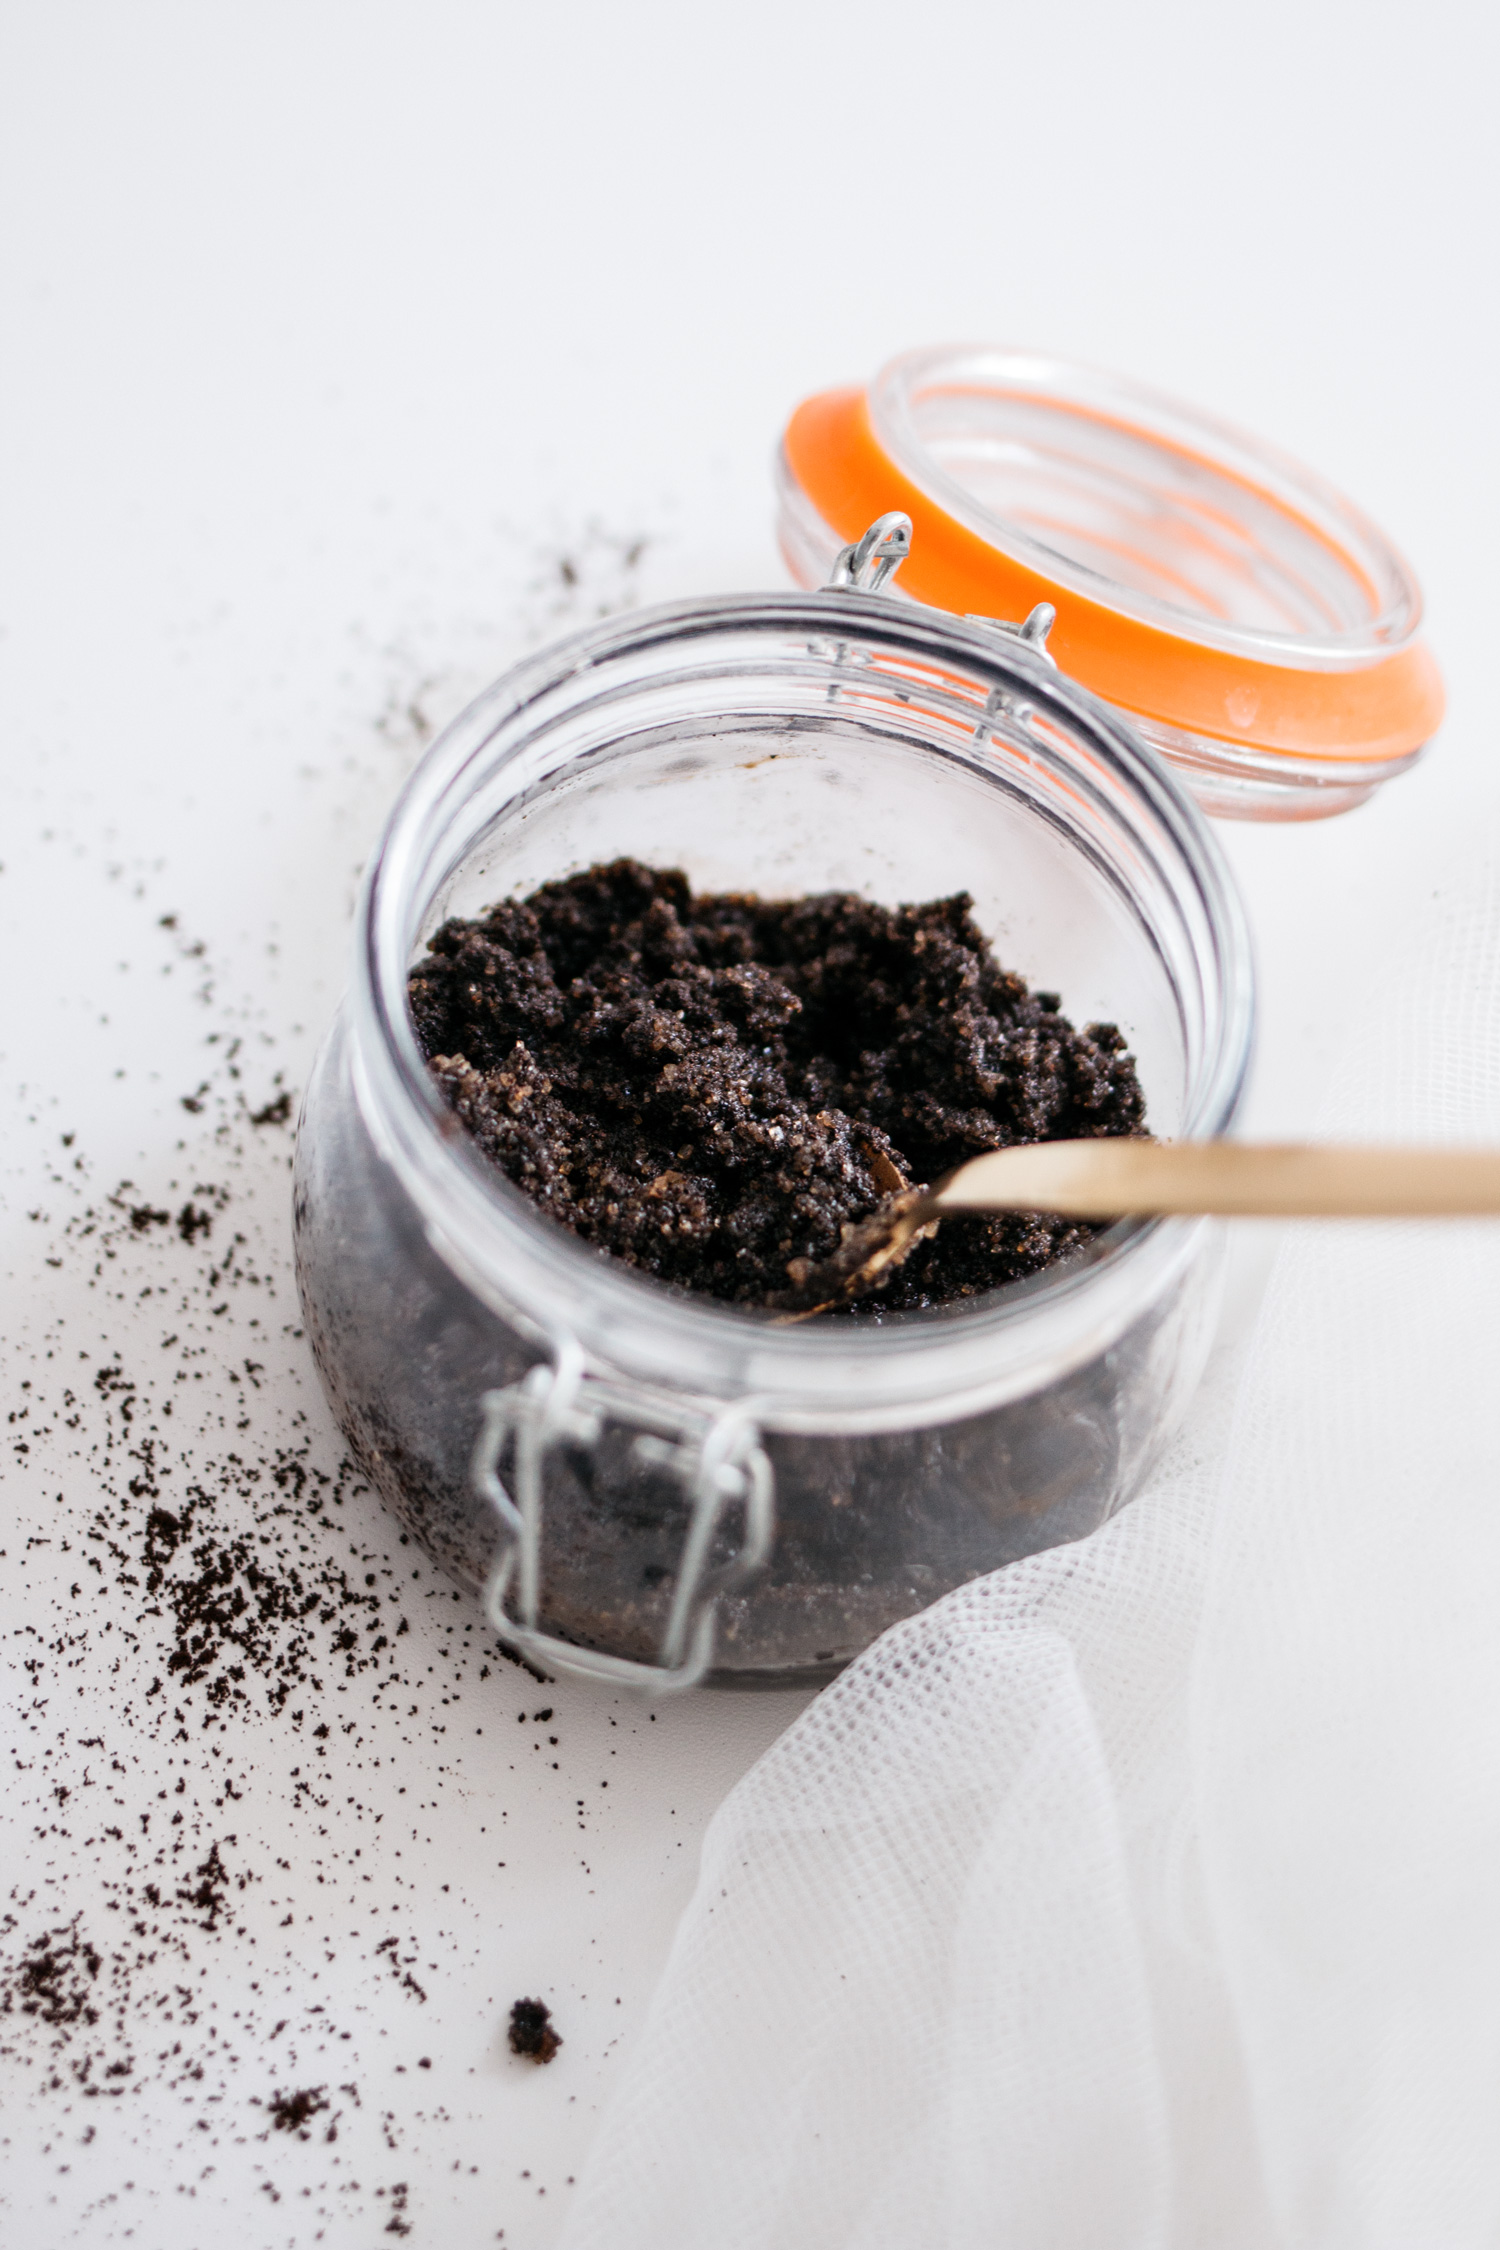 diy: coffee scrub | how to do your own body peeling against cellulite | homemade